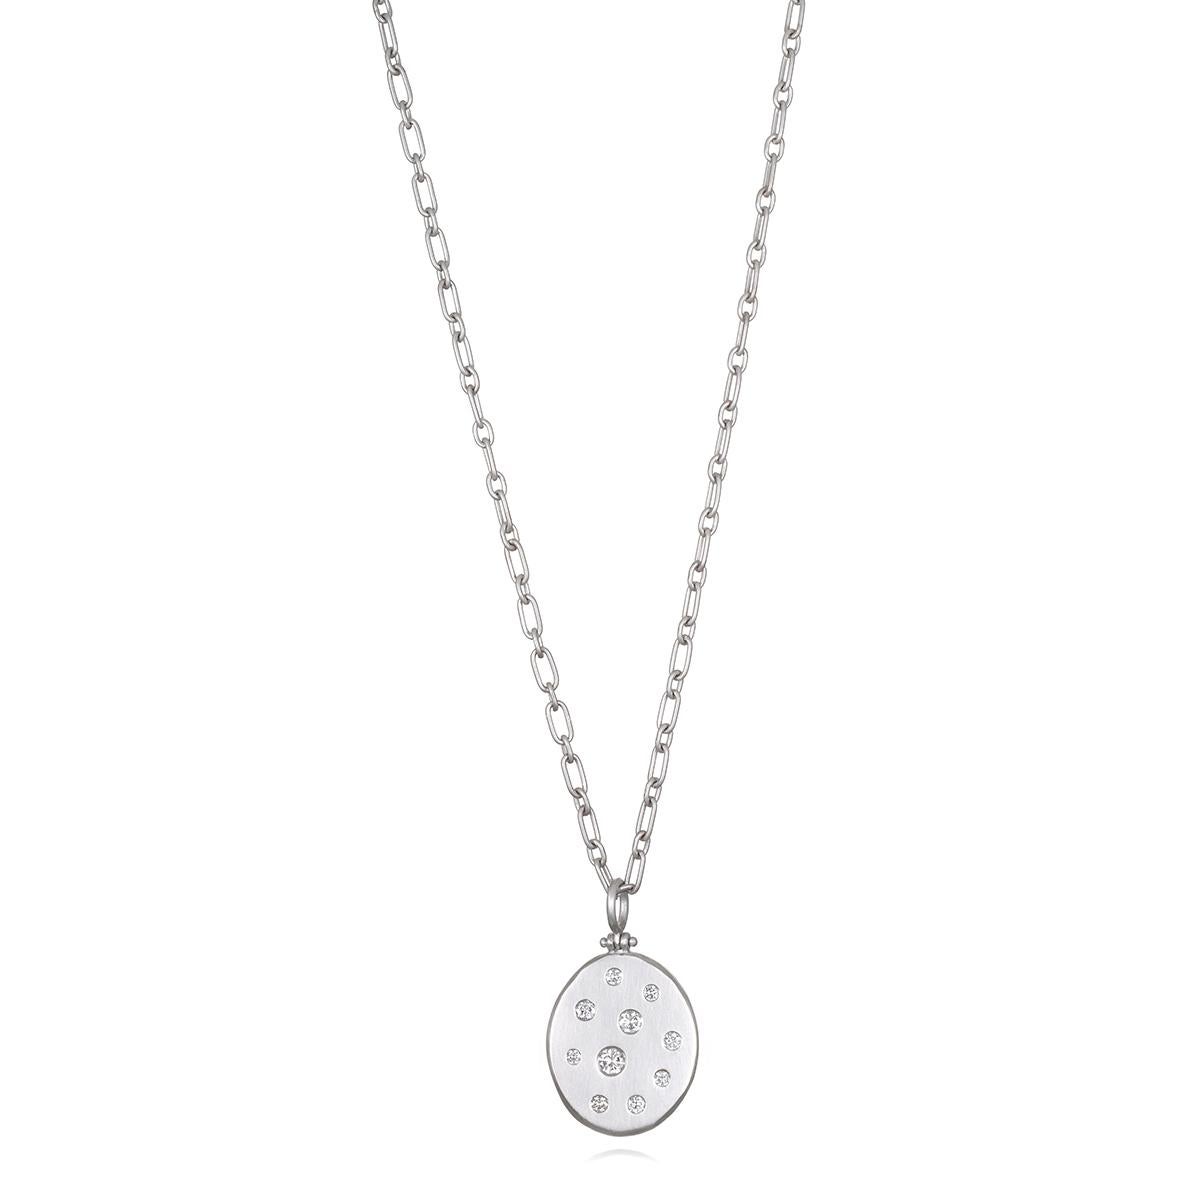 Versatile and easy to wear, Faye Kim's Platinum Diamond Large Hinged Dog Tag Pendant is perfect for every day. The pendant, which shimmers and sparkles with its diamonds, is matte-finished in platinum, making it ideal for any occasion. Whether worn